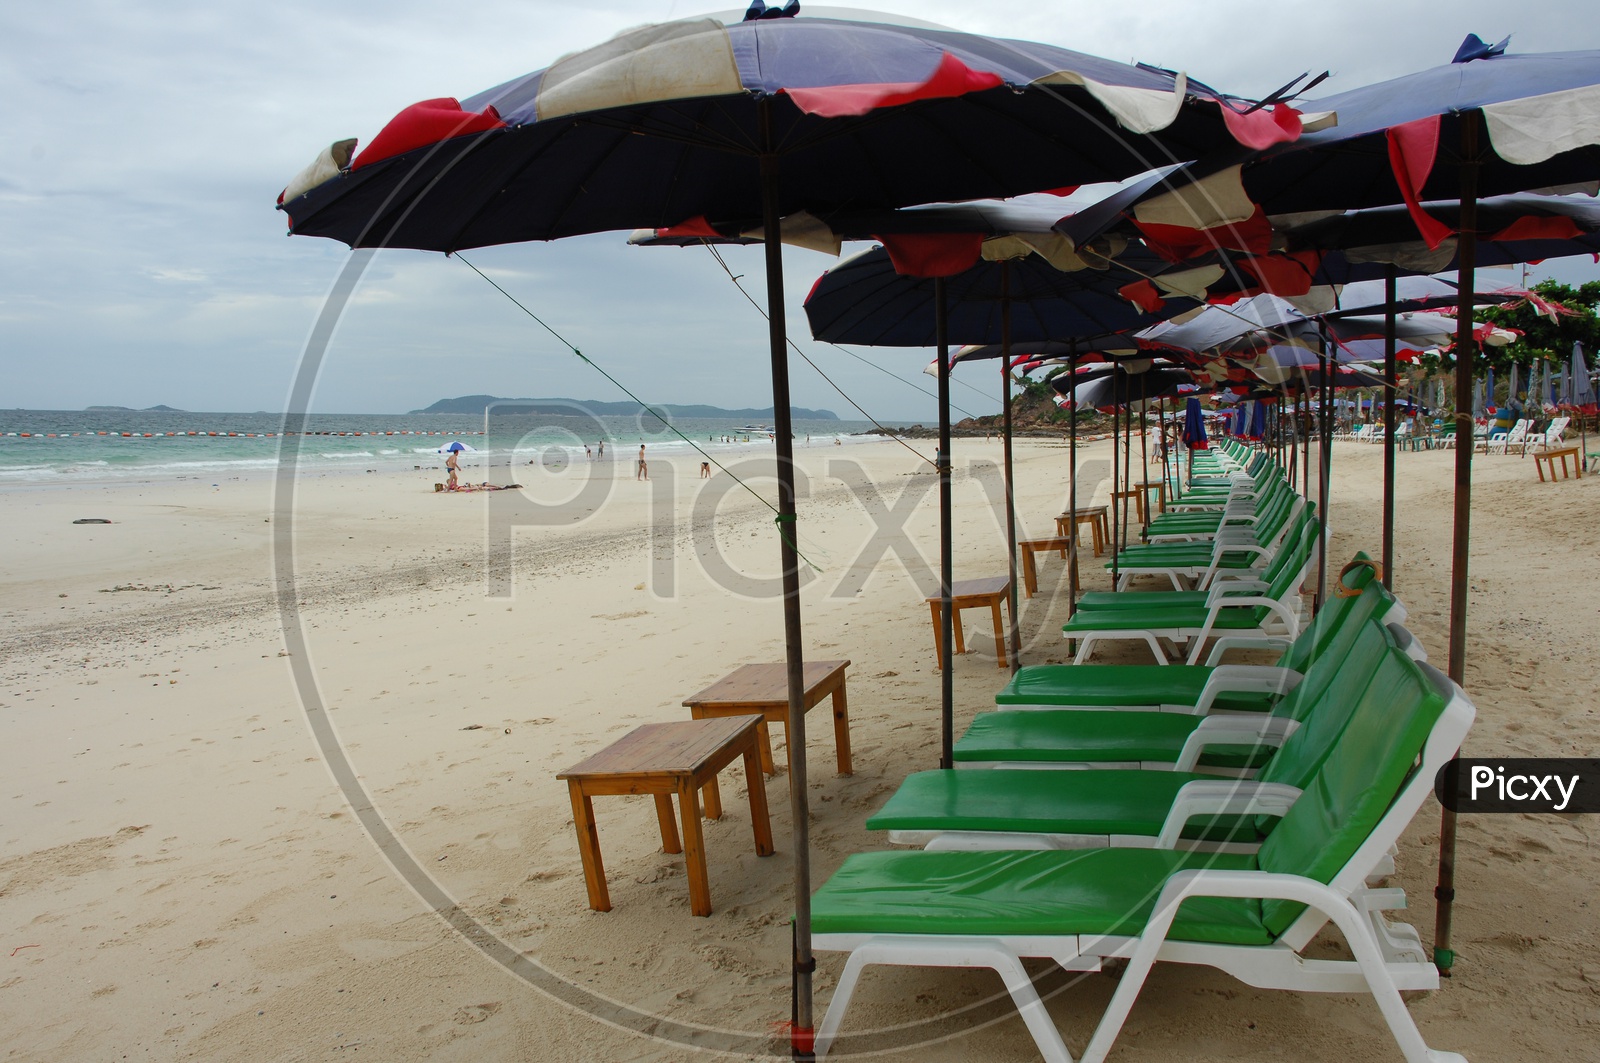 Pool chairs with umbrellas at the beach